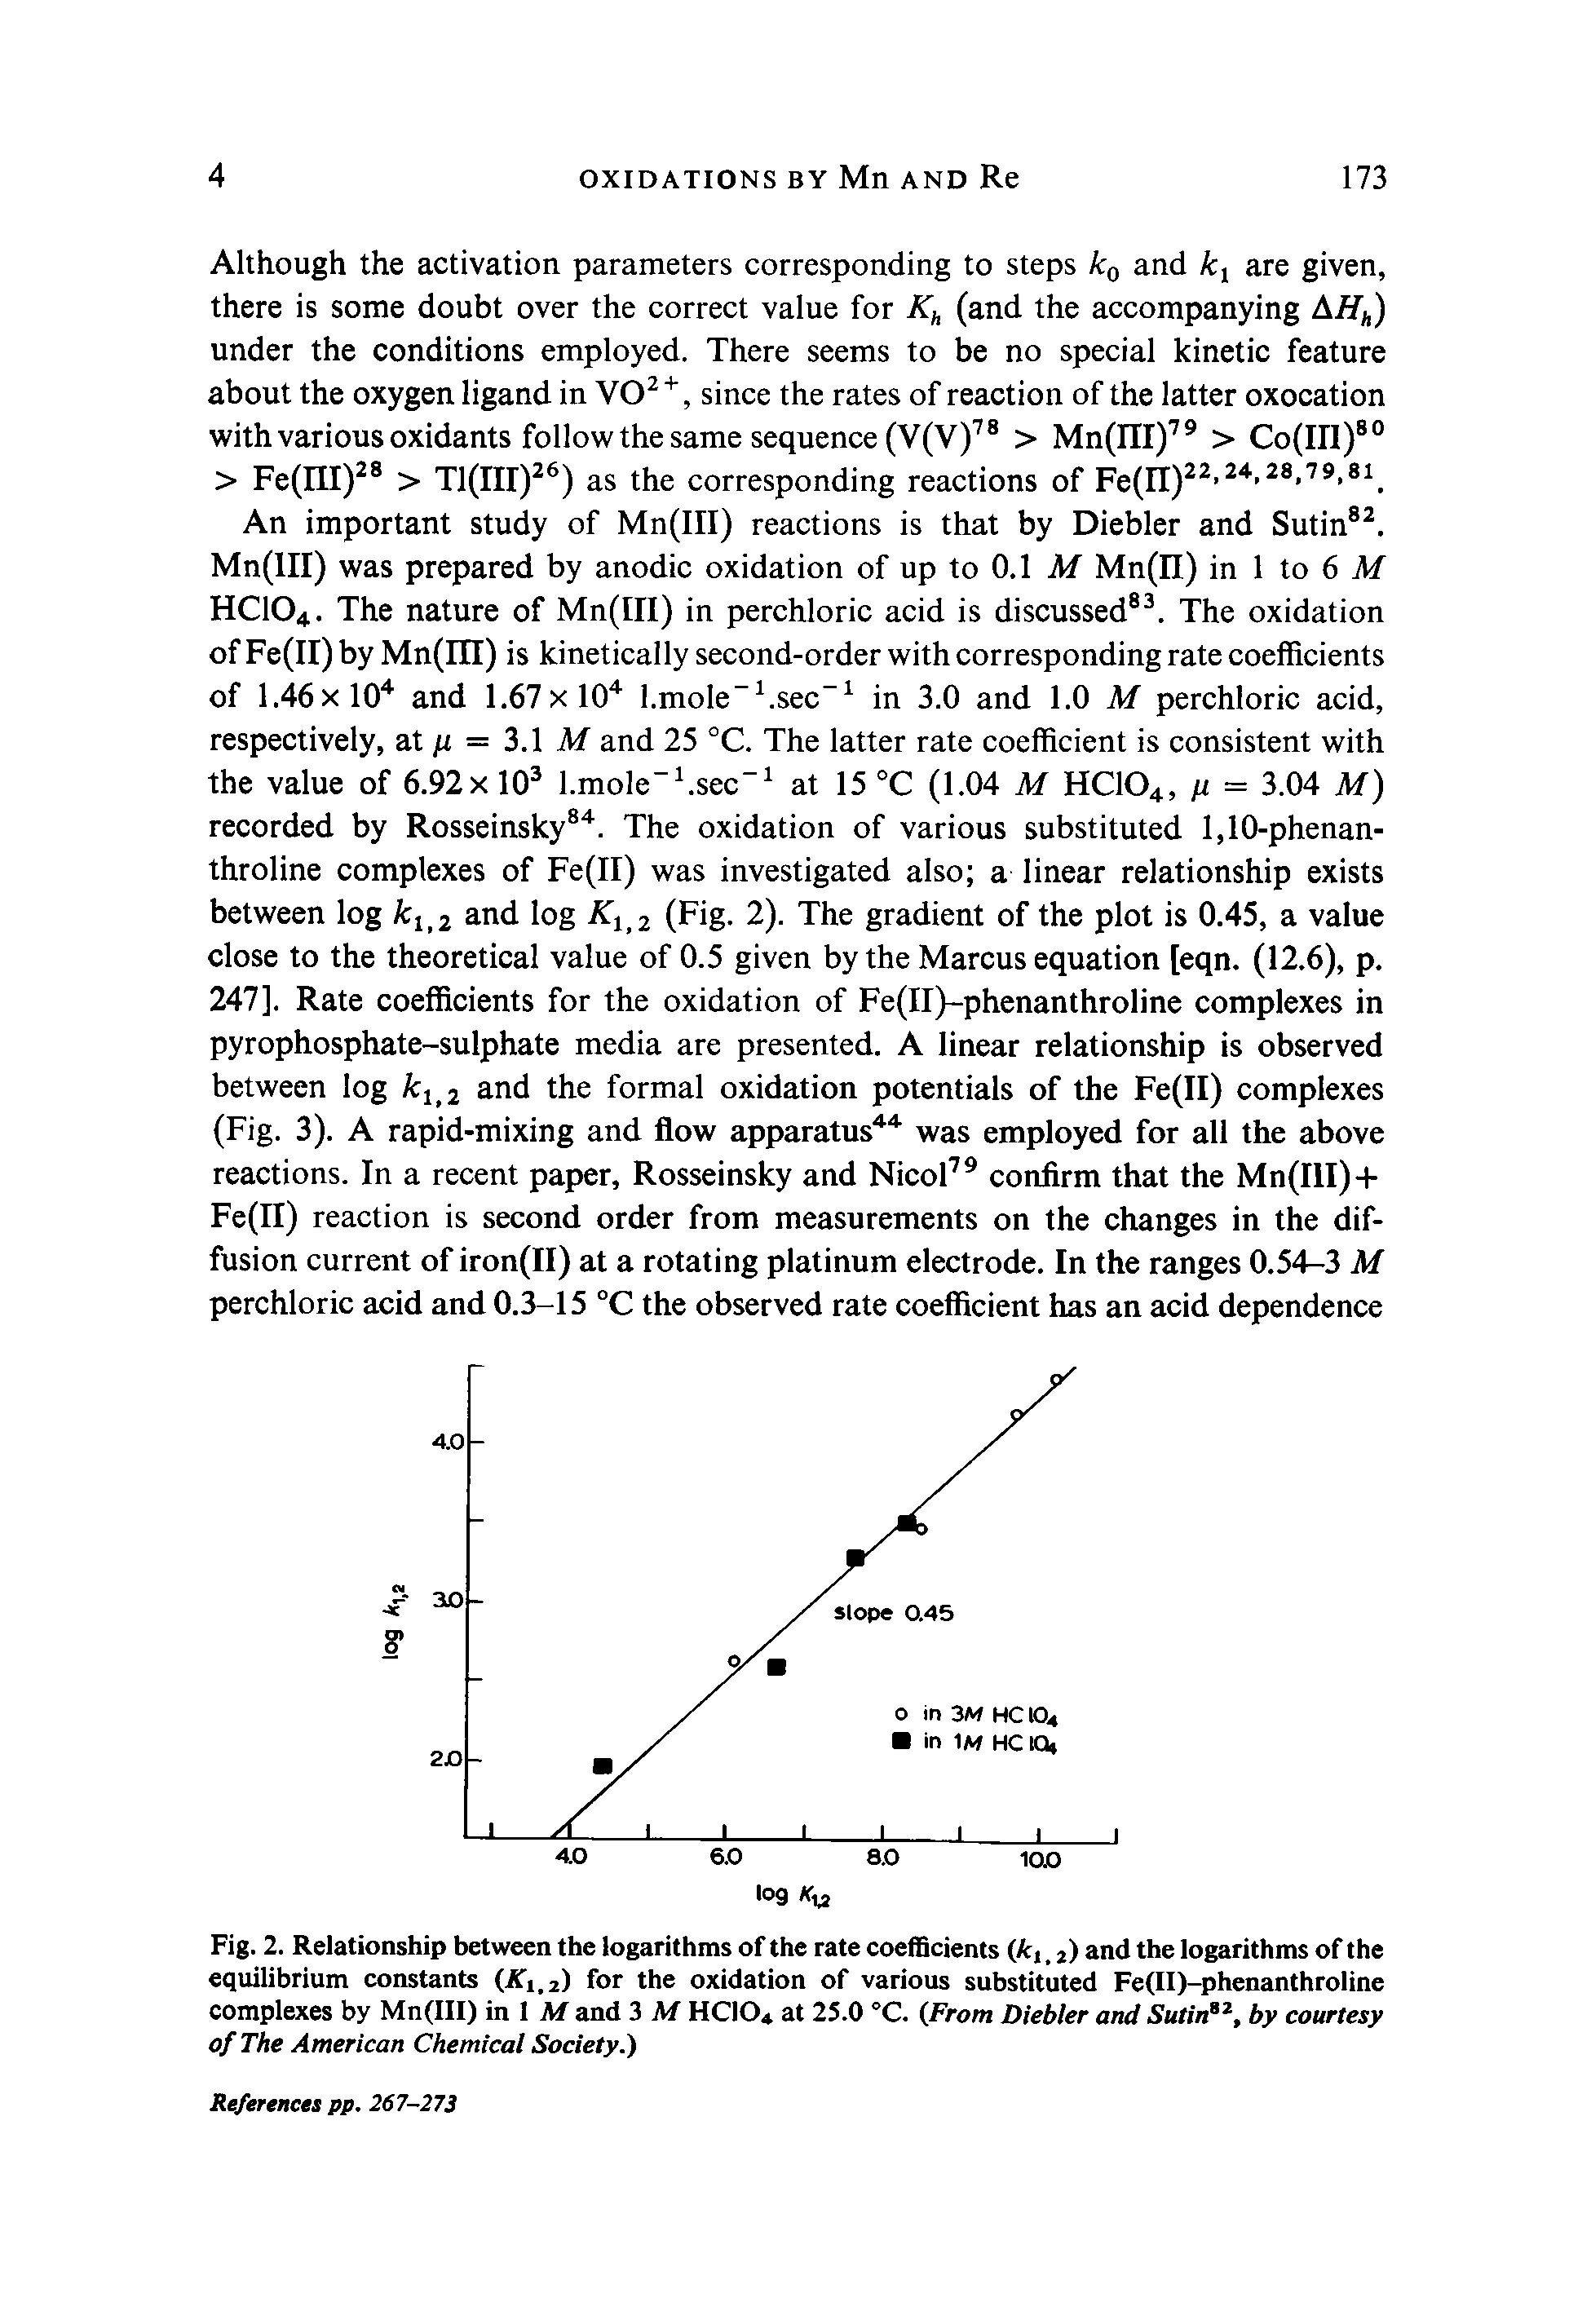 Fig. 2. Relationship between the logarithms of the rate coefficients (Atj. 2) and the logarithms of the equilibrium constants (Jfi.i) for the oxidation of various substituted Fe(II)-phenanthroline complexes by Mn(III) in 1 A/ and 3 Af HCIO4 at 25.0 °C. (From Diebler and Sutin, by courtesy of The American Chemical Society.)...